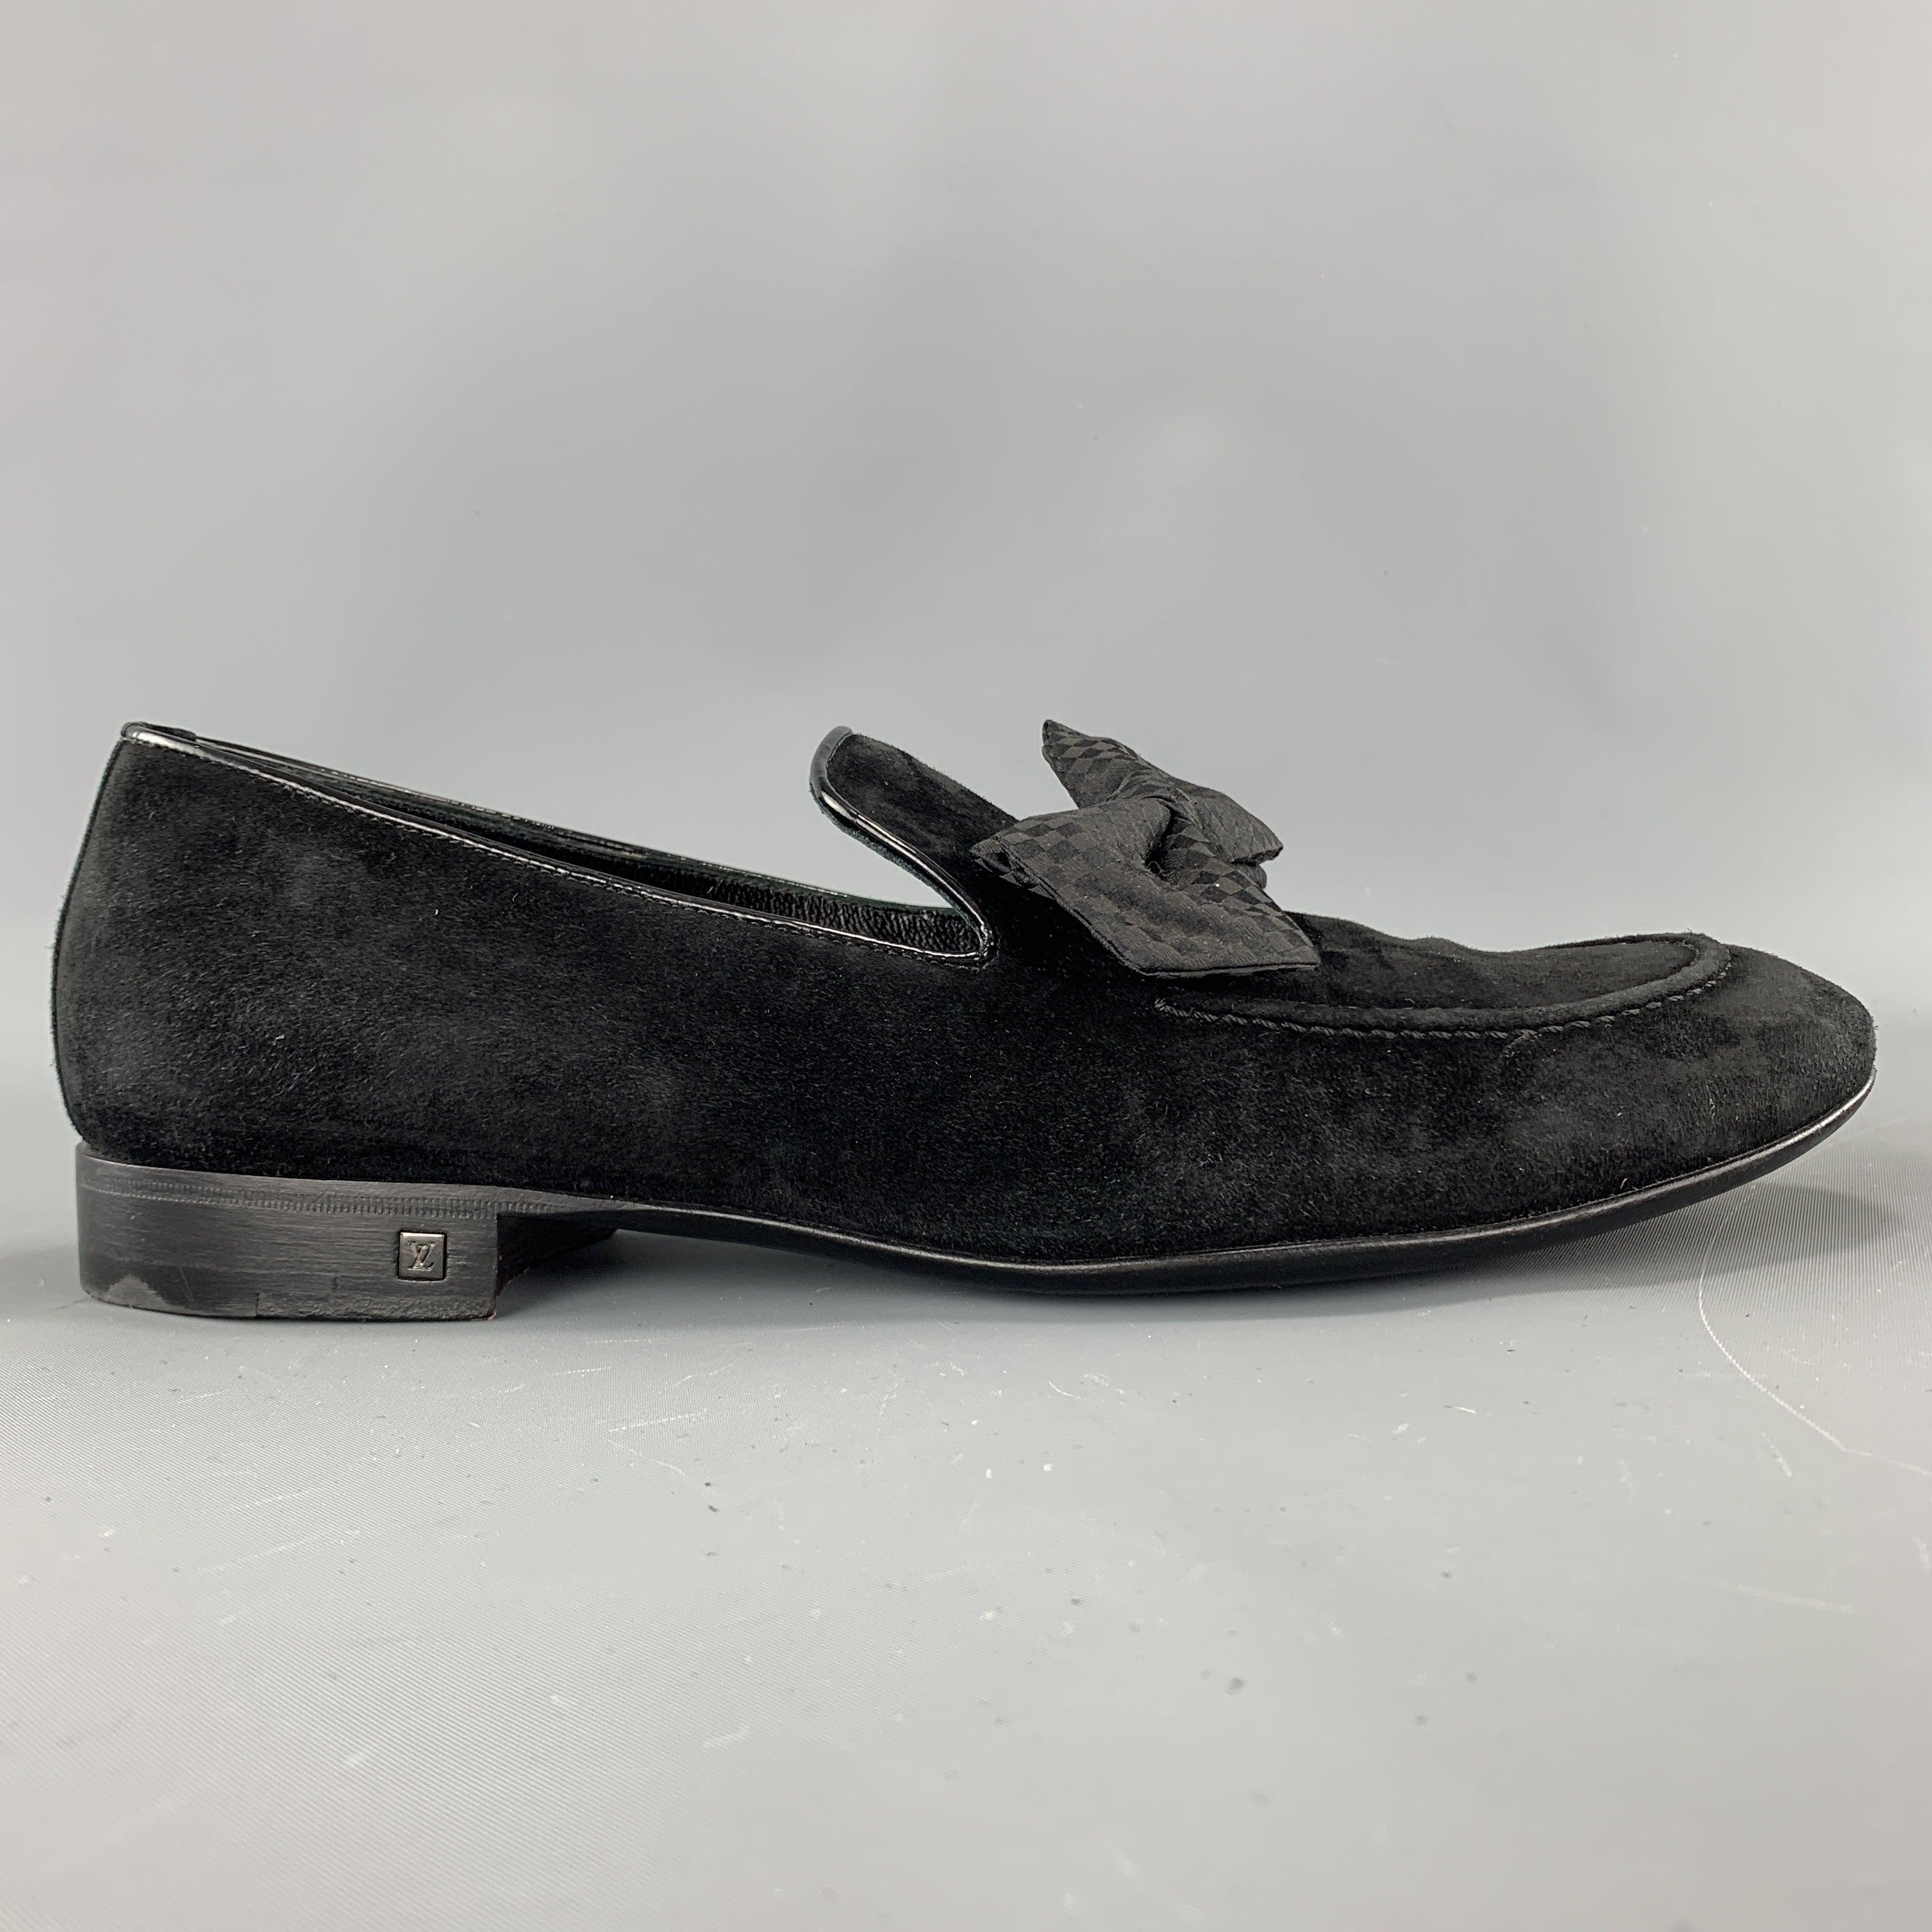 LOUIS VUITTON Size 9 Black Suede Slip On Bow Loafers In Good Condition For Sale In San Francisco, CA